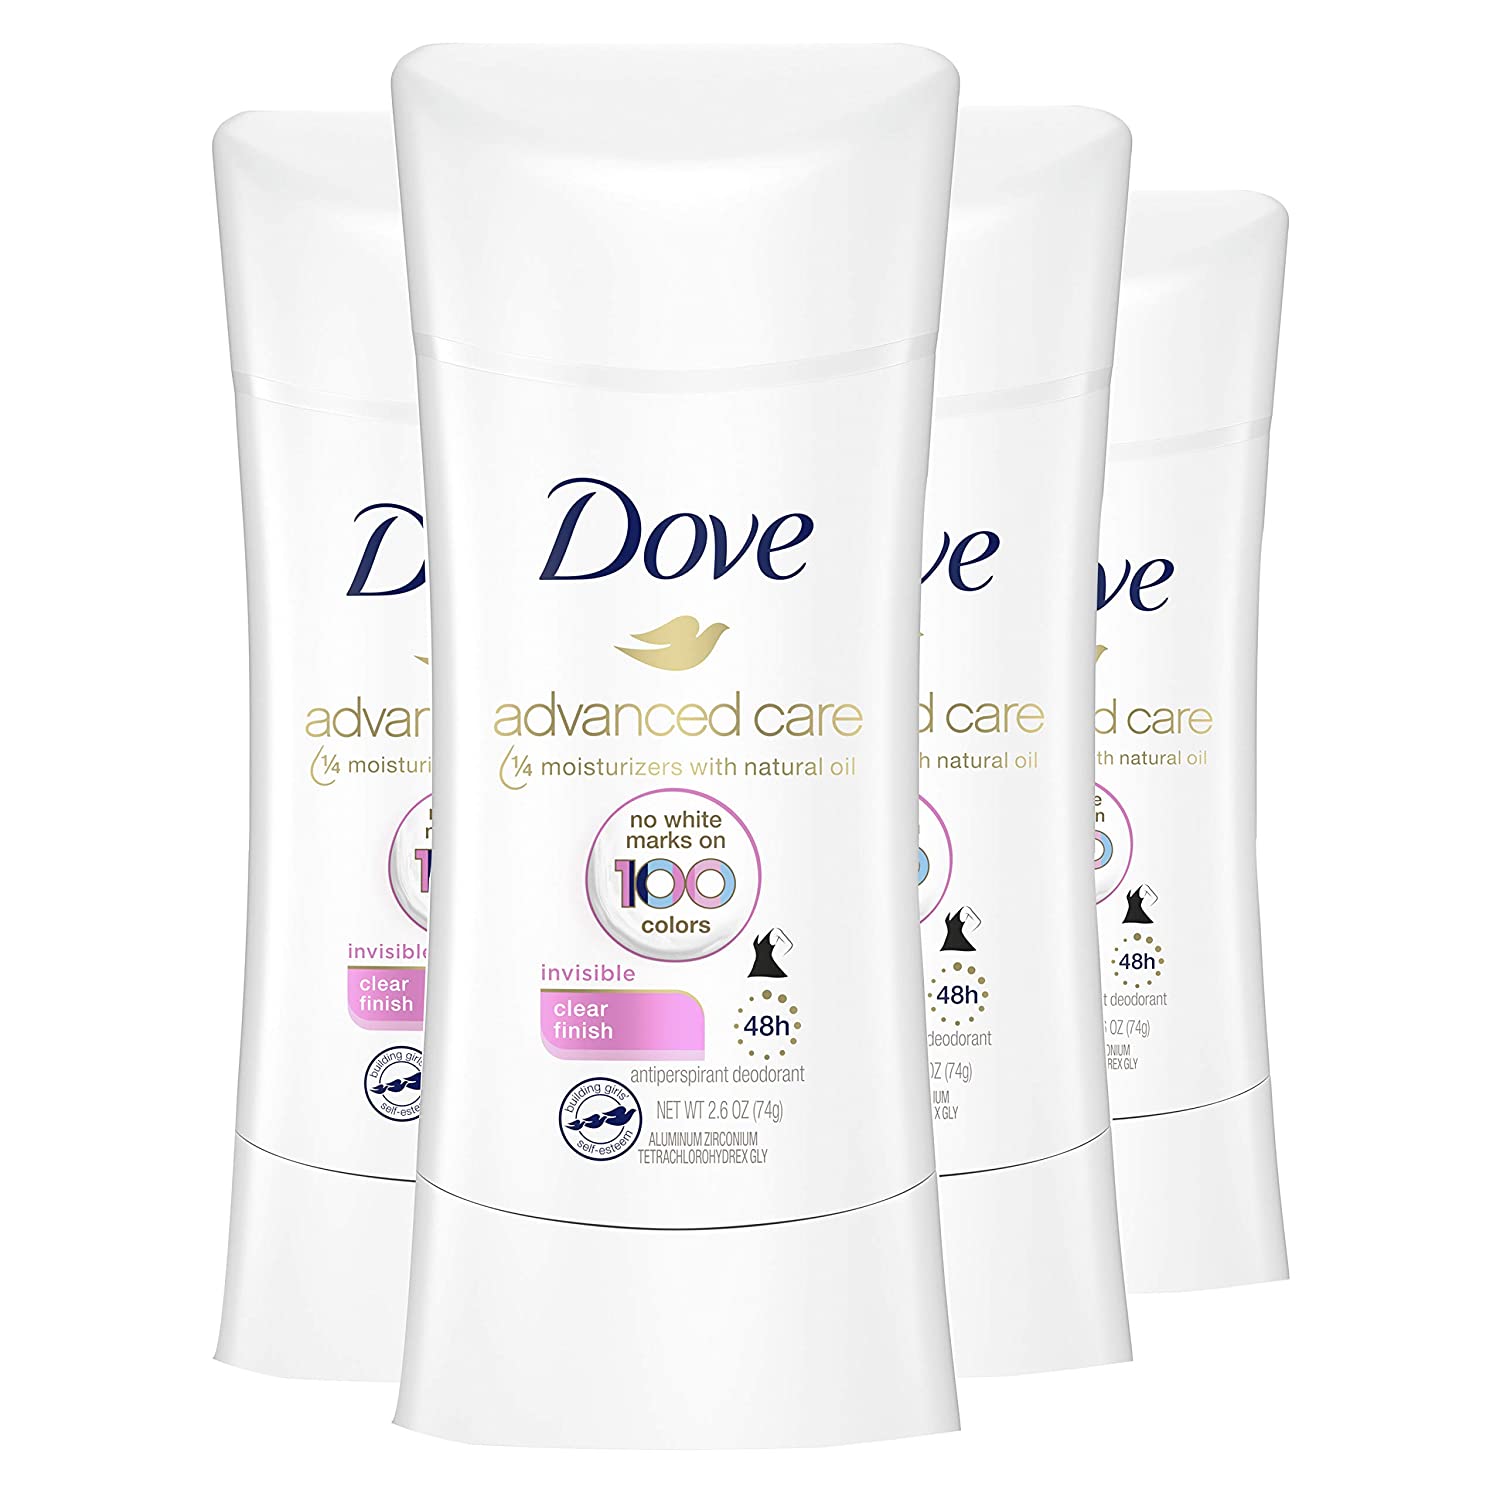 4-Pack 2.6-Oz Dove Advanced Care Women's Antiperspirant Deodorant Stick (Clear Finish) $10.40 w/ S&S + Free Shipping w/ Prime or on $25+